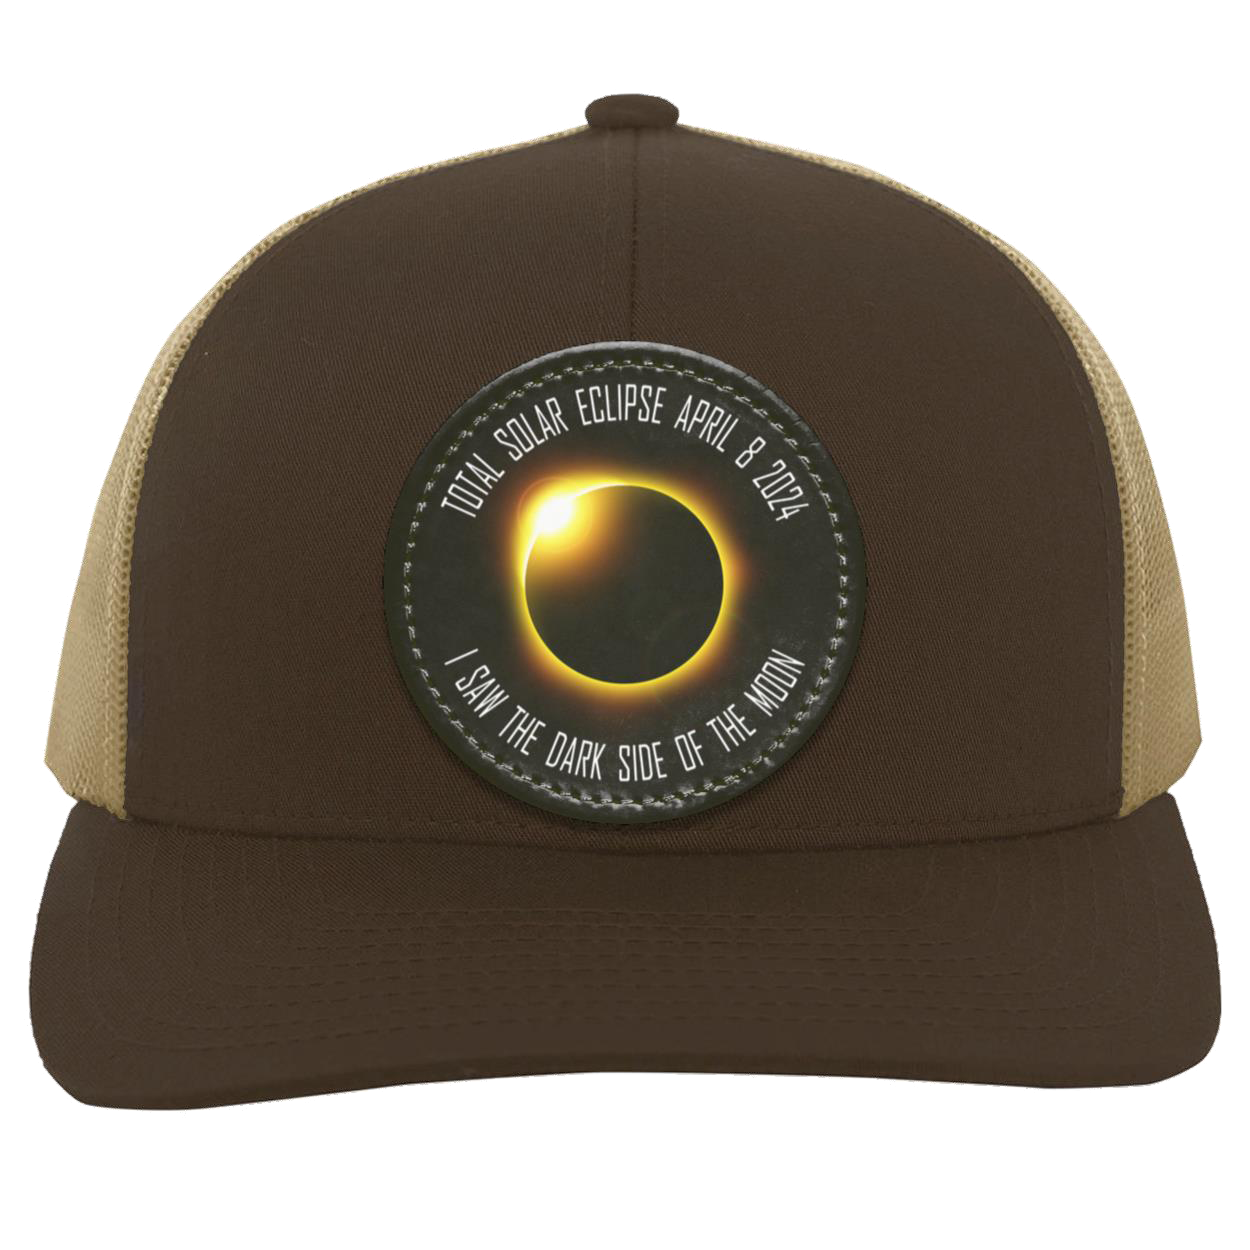 Total Solar Eclipse April 8 2024 eclipse hat cap, I Saw the Dark Side of the Moon, Eclipse gift, Trucker Snap Back - Patch